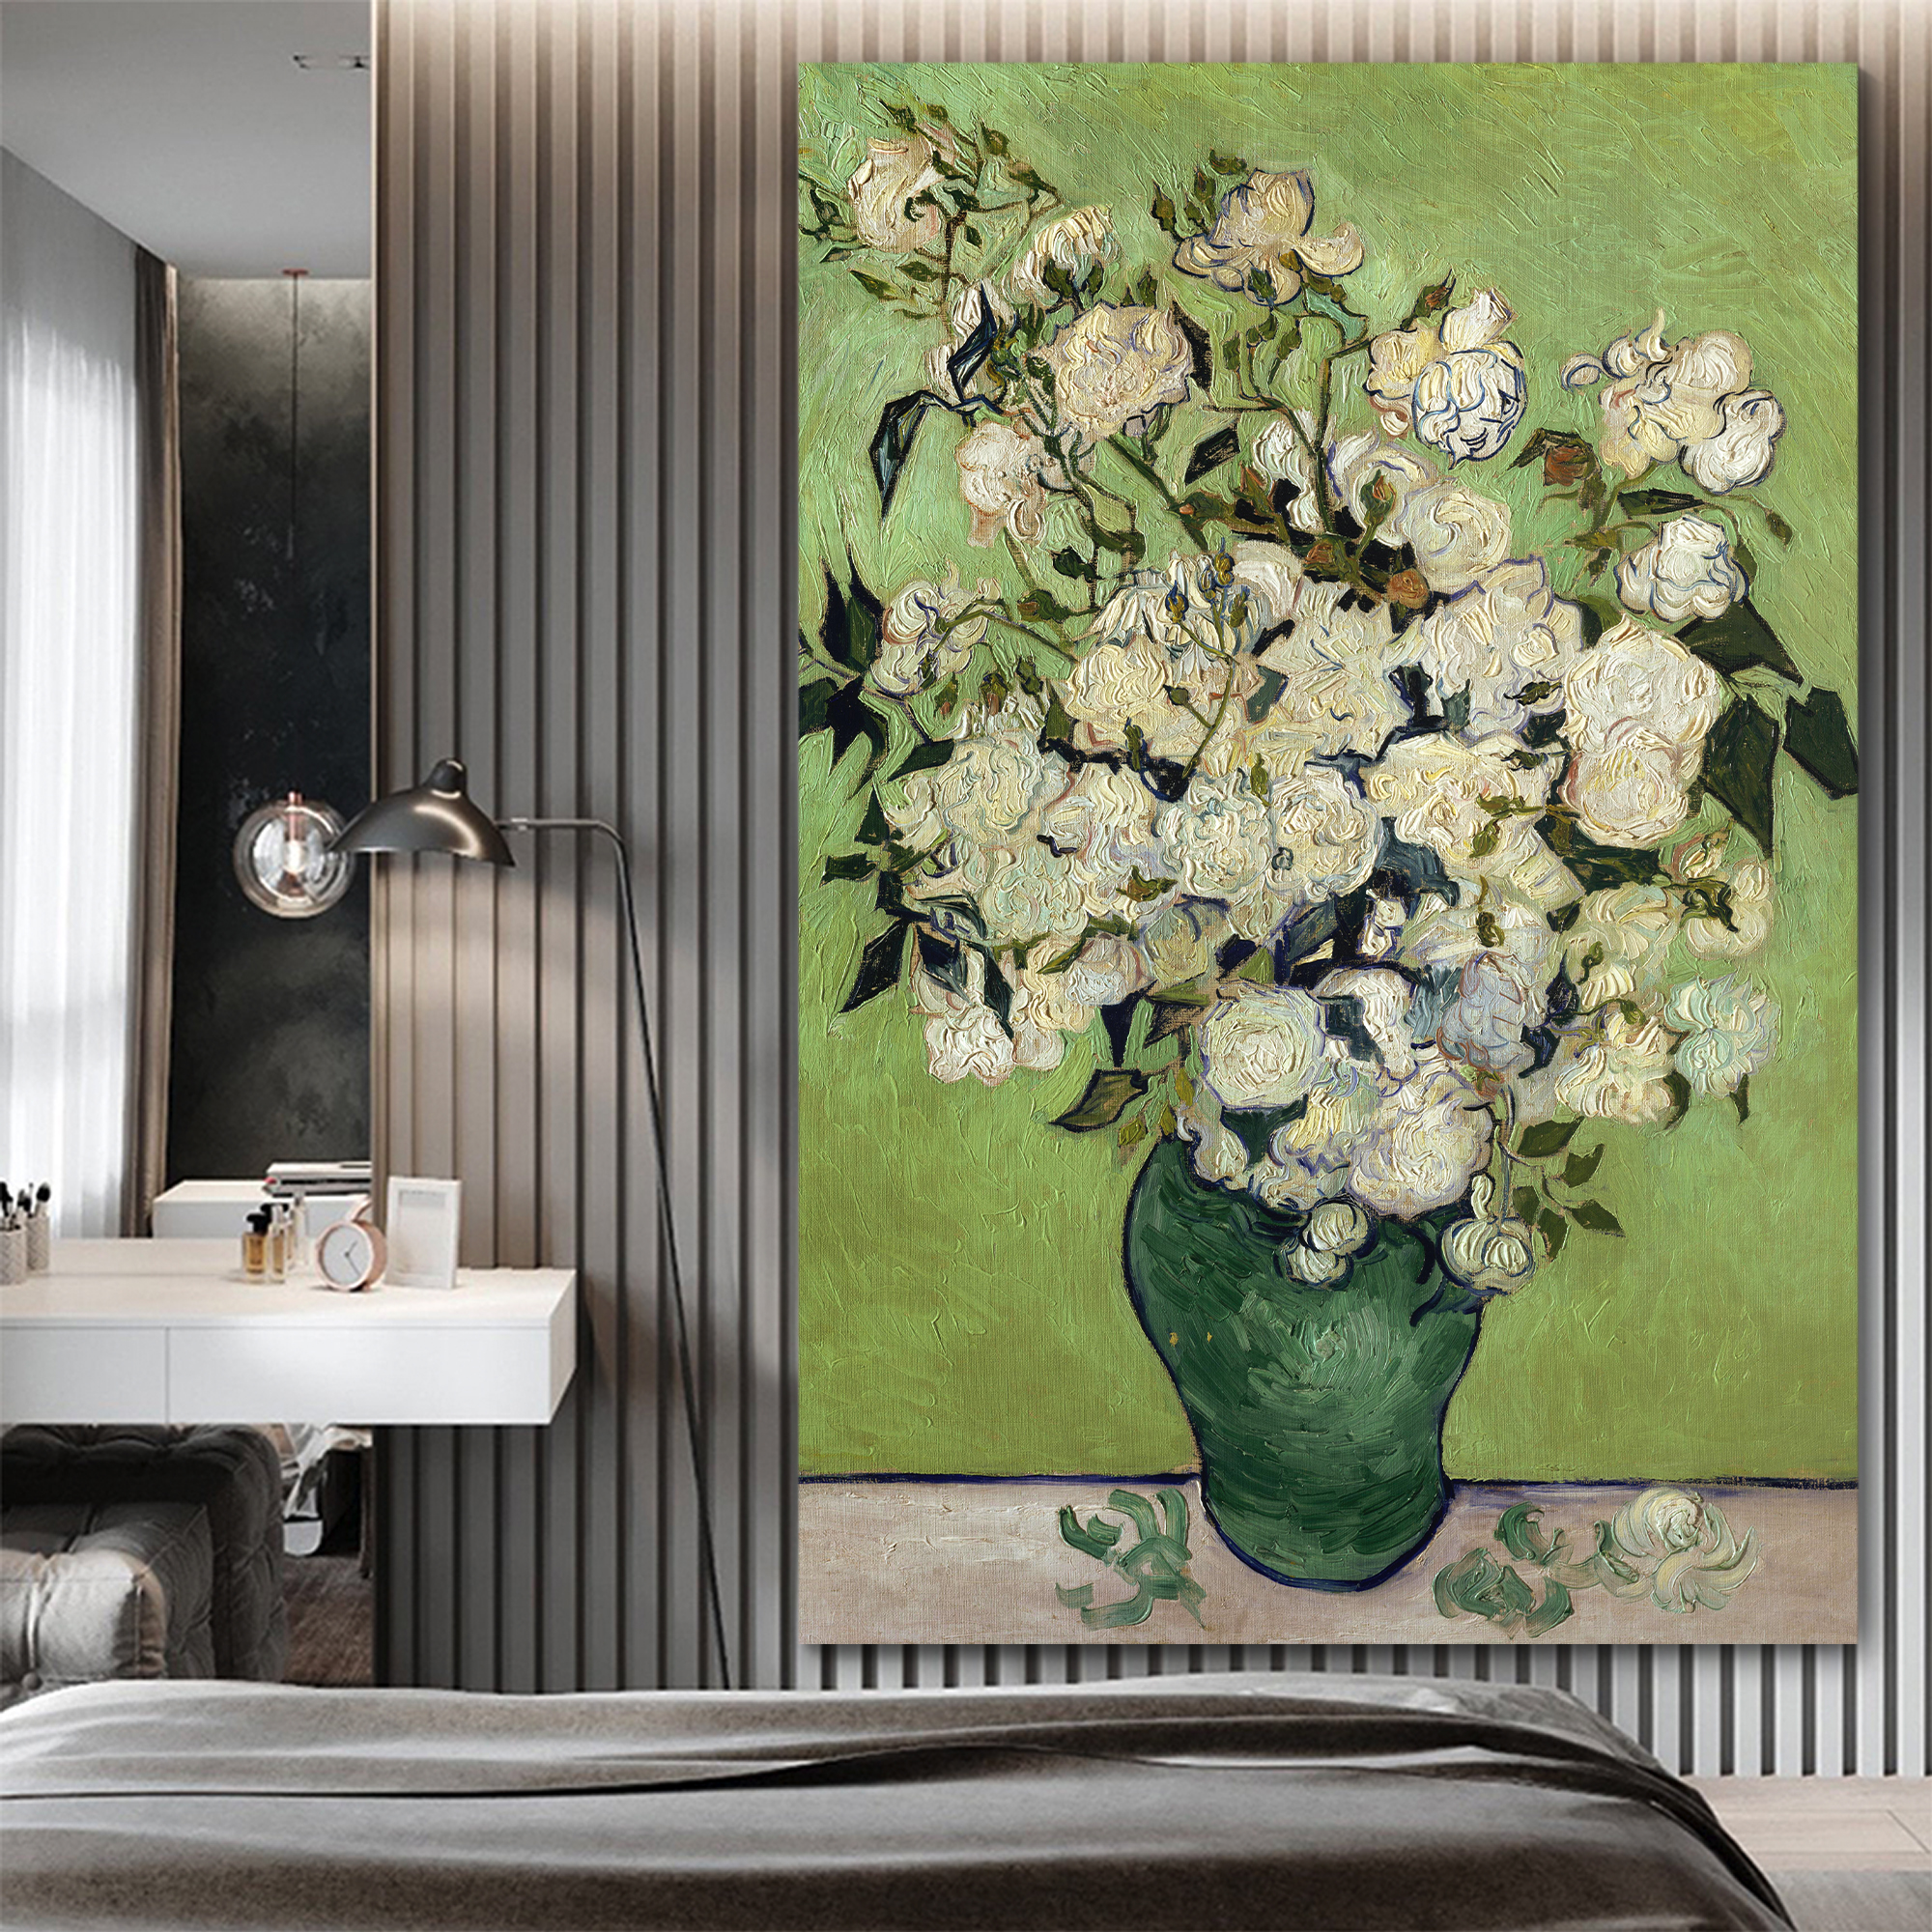 Irises and Roses by Vincent Van Gogh - Oil Painting Reproduction on Canvas Prints Wall Art, Ready to Hang - 24